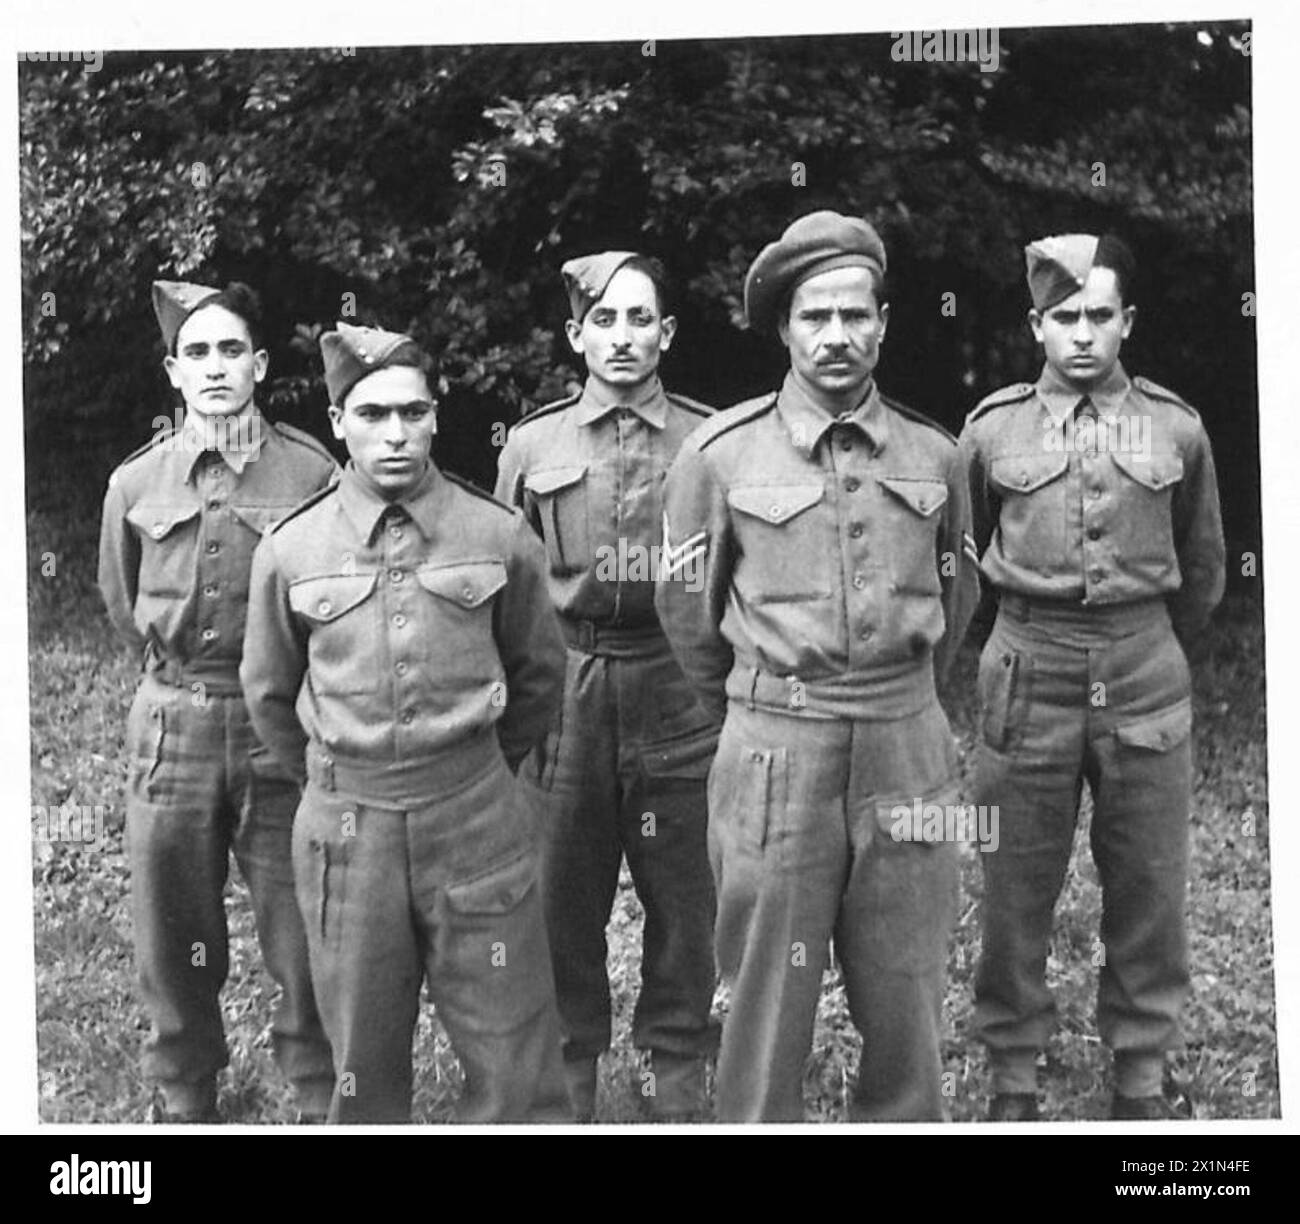 ARAB, ETC. EX-PRISONERS OF WAR IN ENGLAND - EGYPTIANS AND LIBYANS RESIDENT IN EGYPT Front row - left to right - Private Mouse Juwayed of Mersa Matruh Corporal Abdul Karim Ahmad of Kara Marnak Back row - left to right - Private Sughayar Salim of El Hammam Private Said Admah Abdul Sattar of Benha Private Ali Abdullah of Minea, British Army Stock Photo